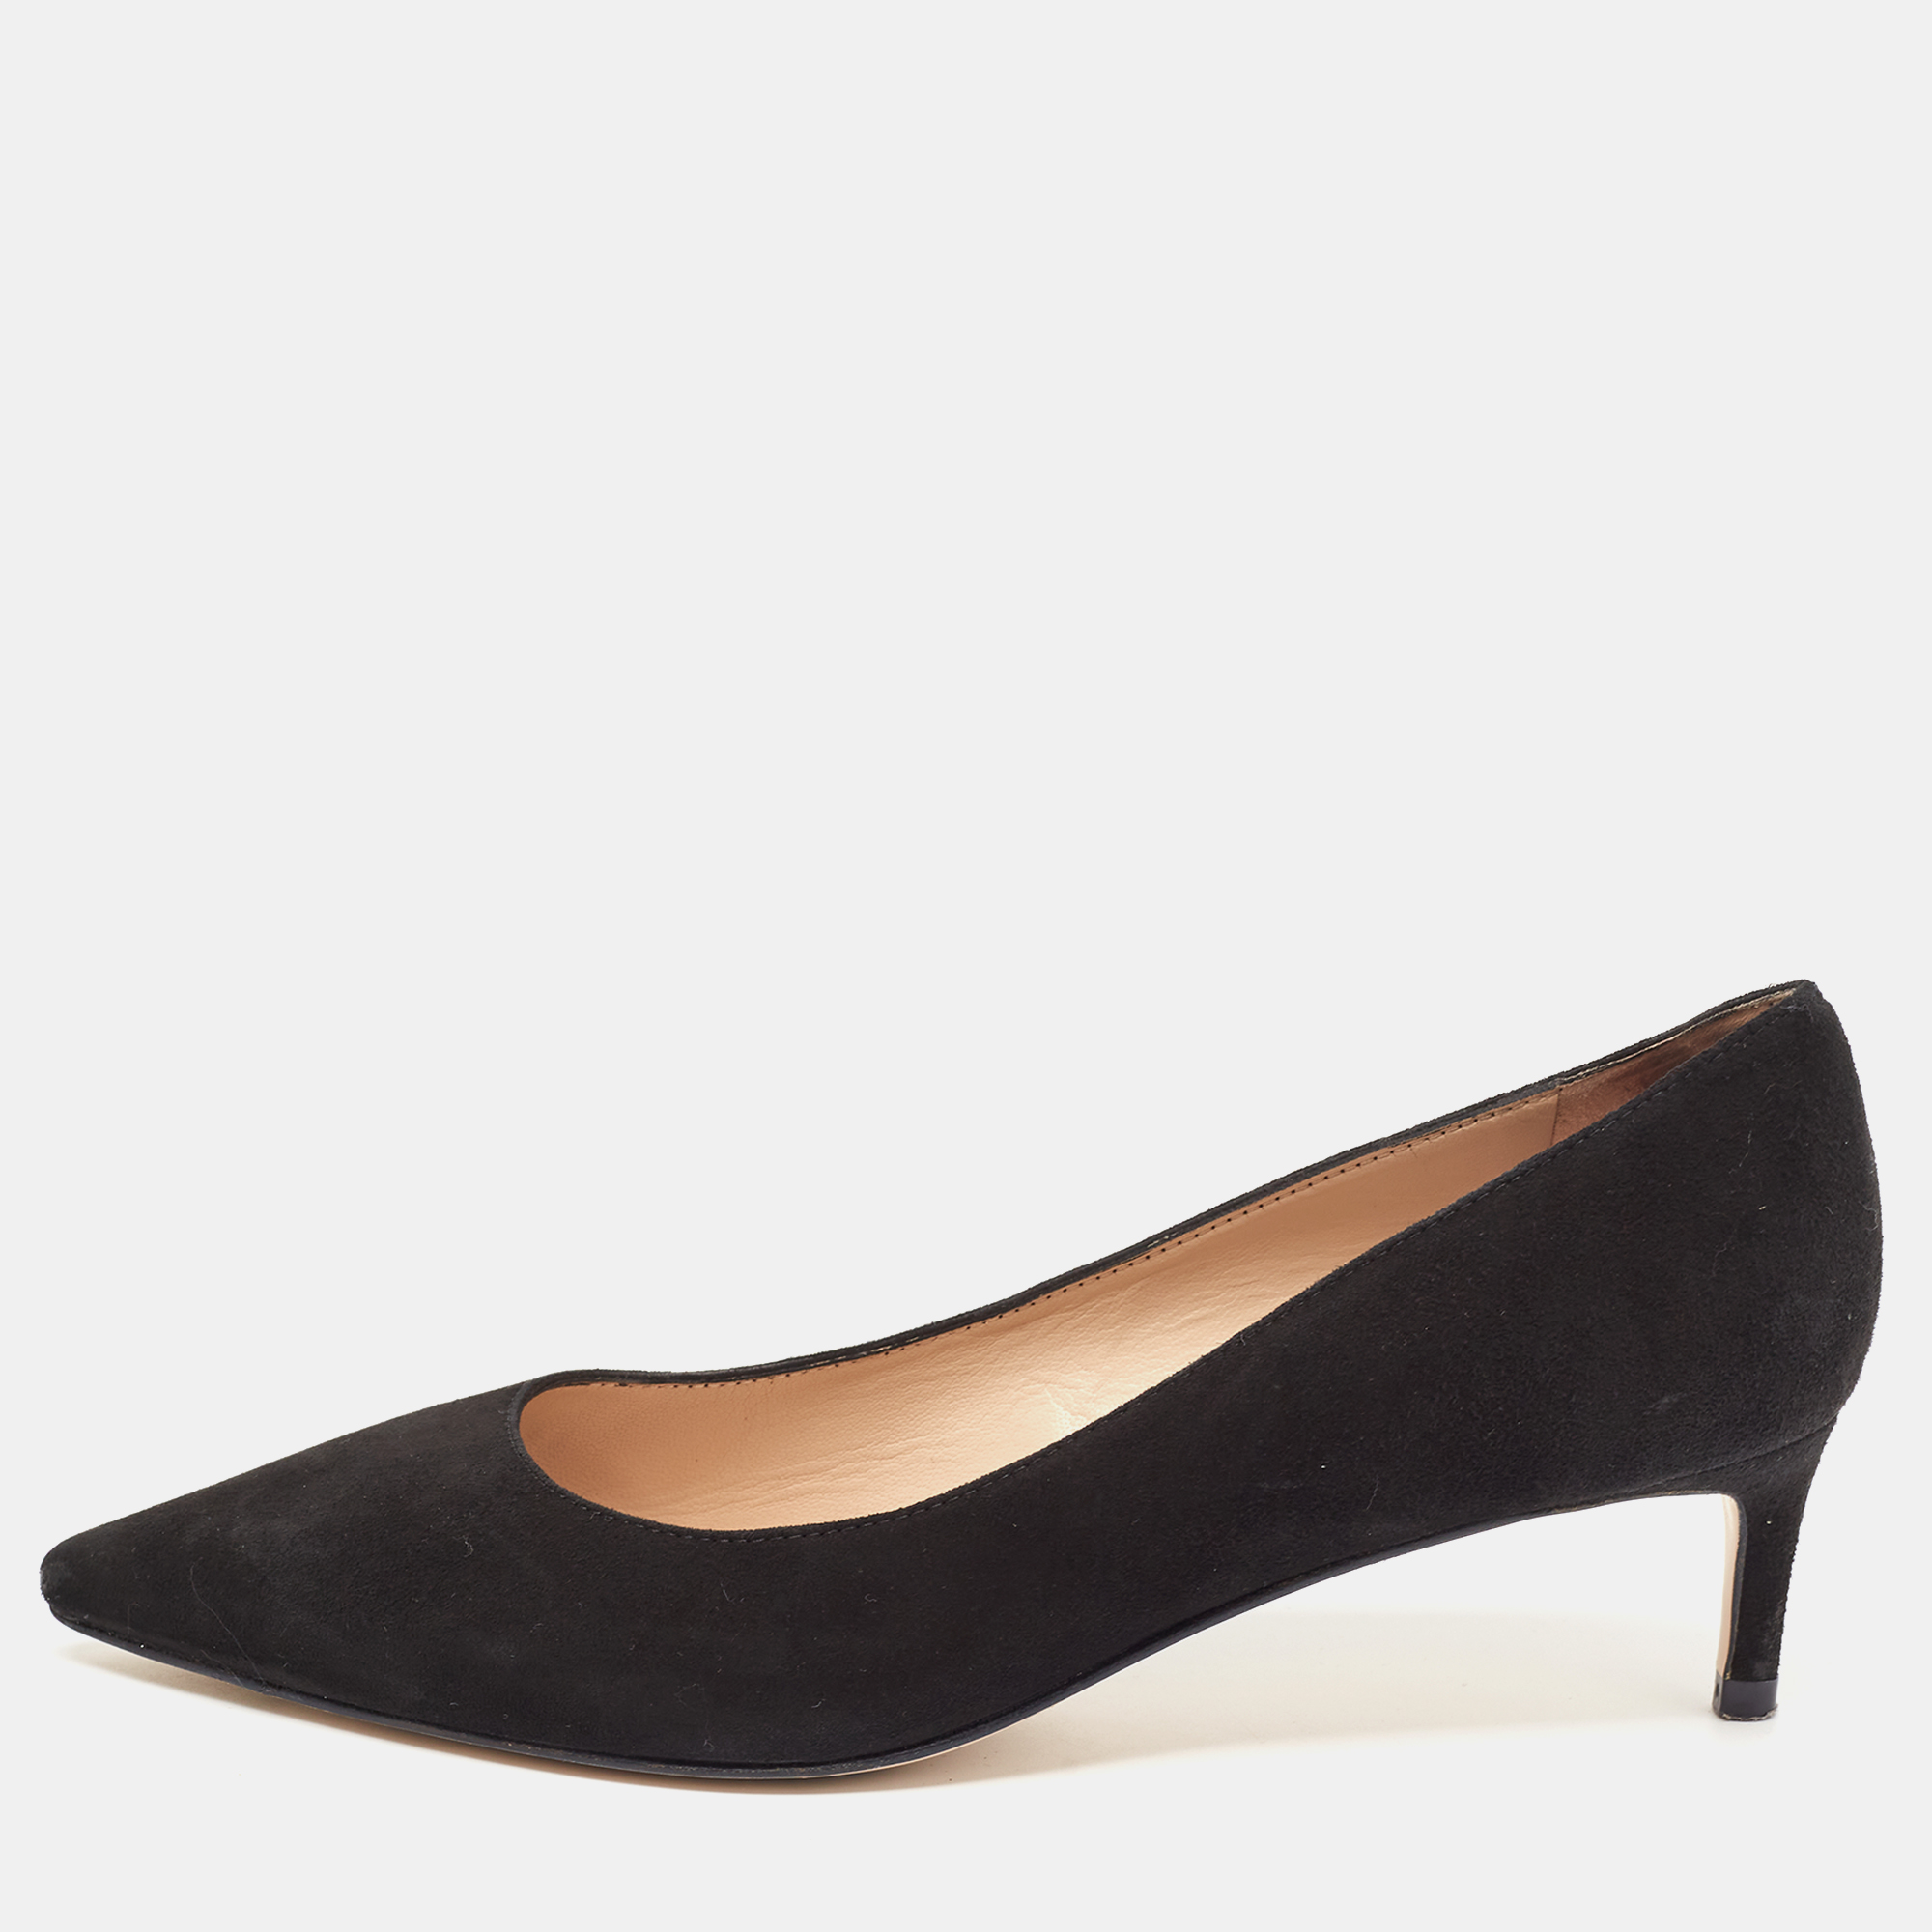 Wonderfully crafted shoes added with notable elements to fit well and pair perfectly with all your plans. Make these Stuart Weitzman black pumps yours today